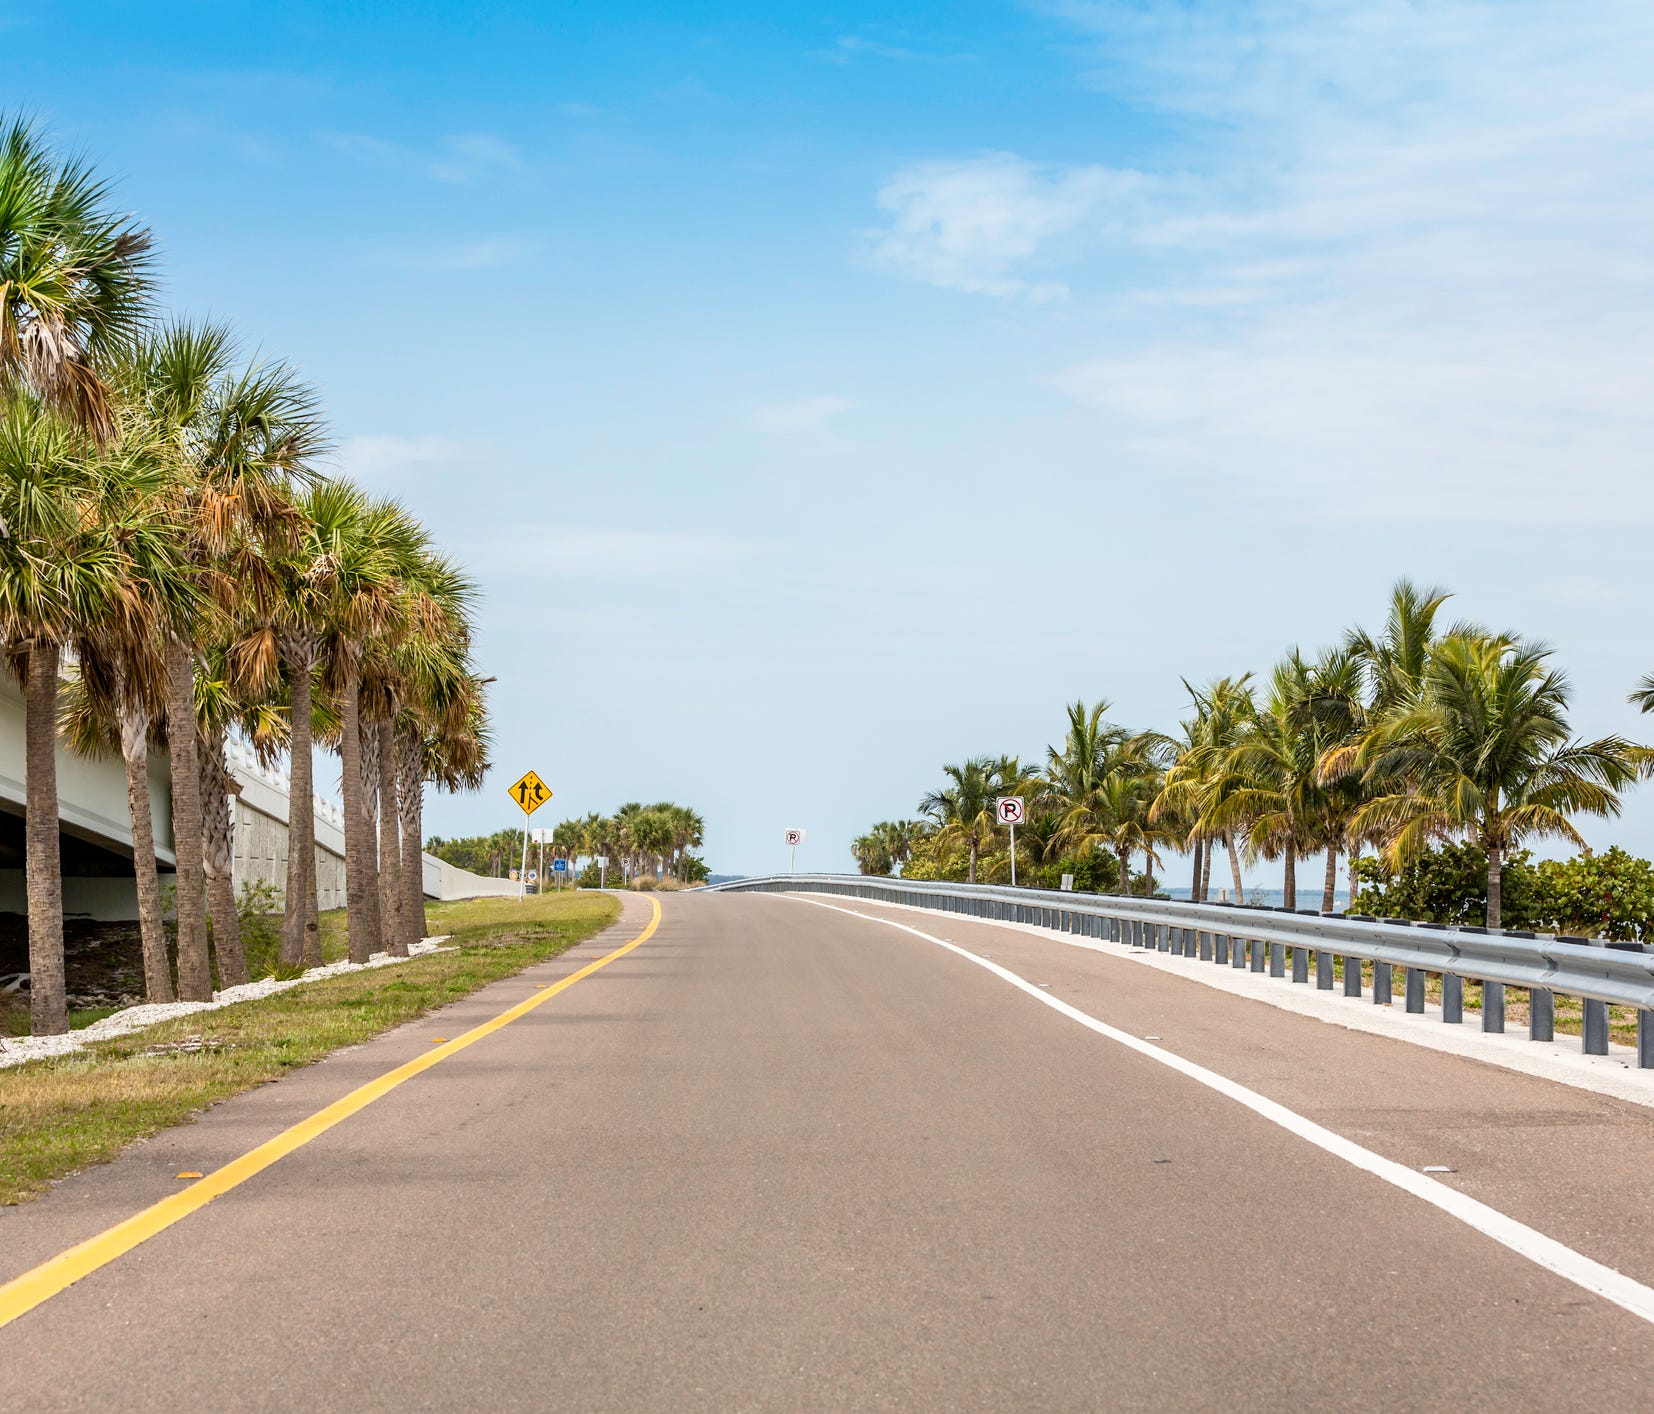 Florida has more than 700 miles of toll roads, more than any other state.